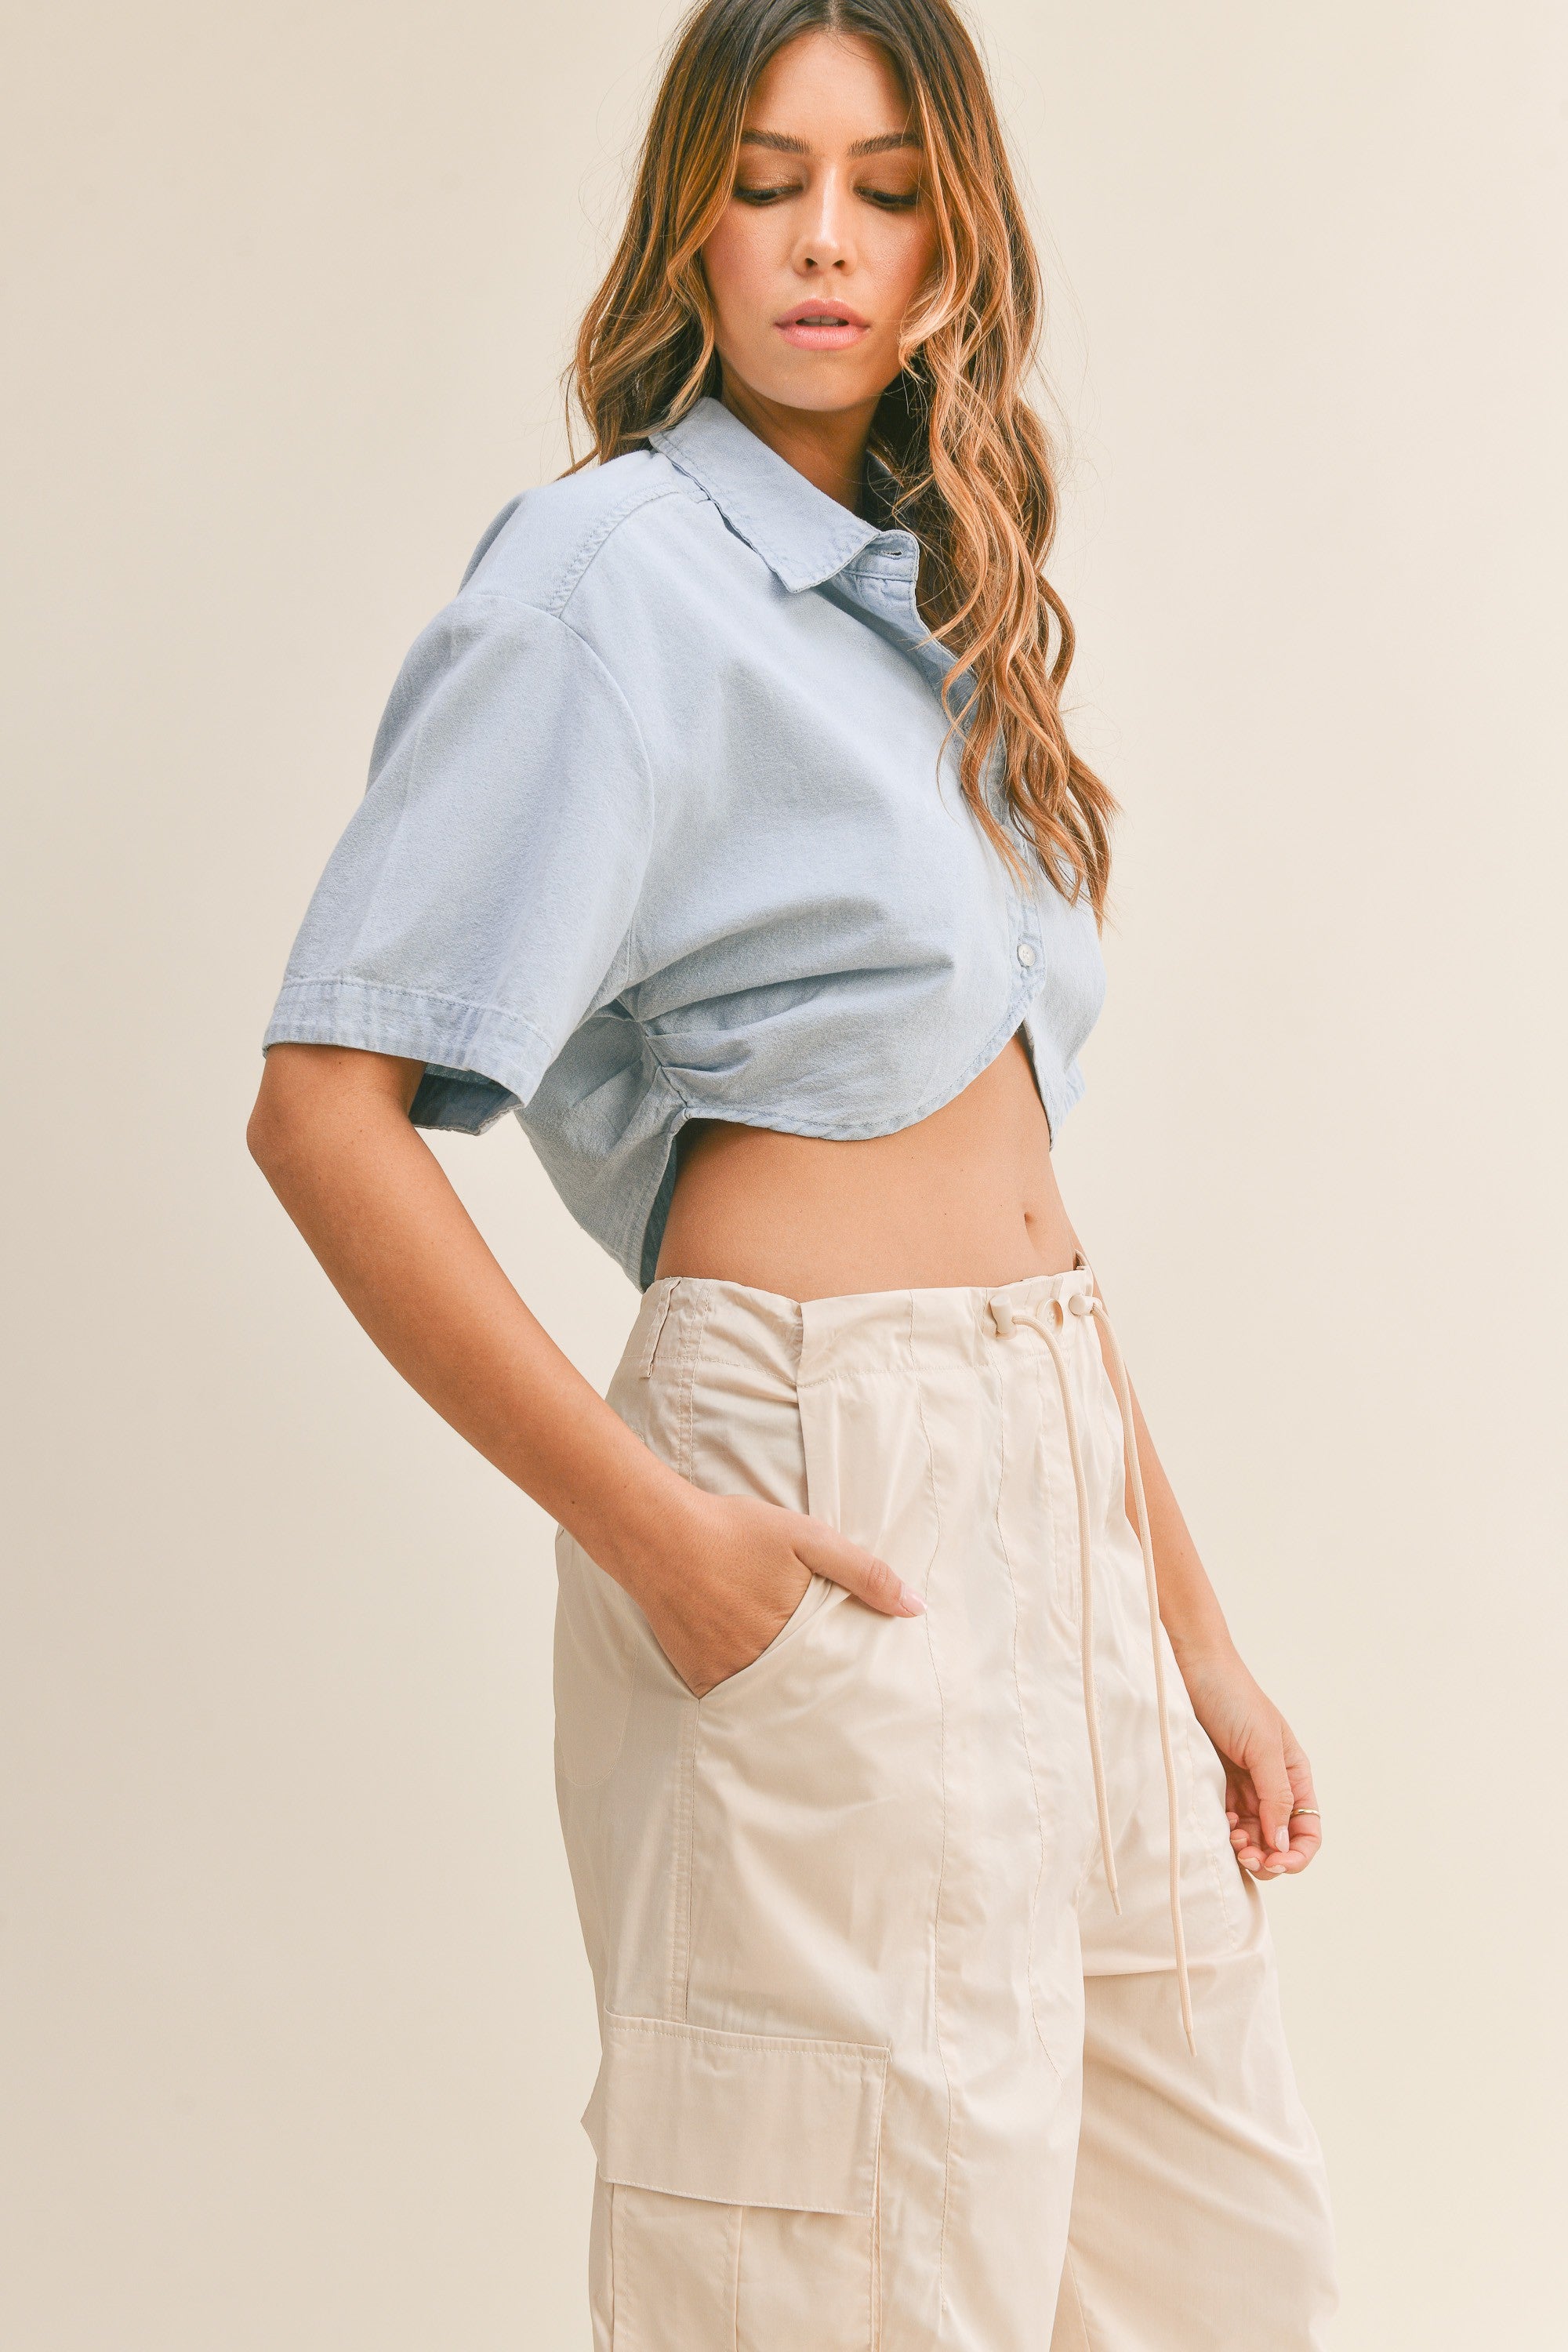 The Leah Cropped Button Up Top